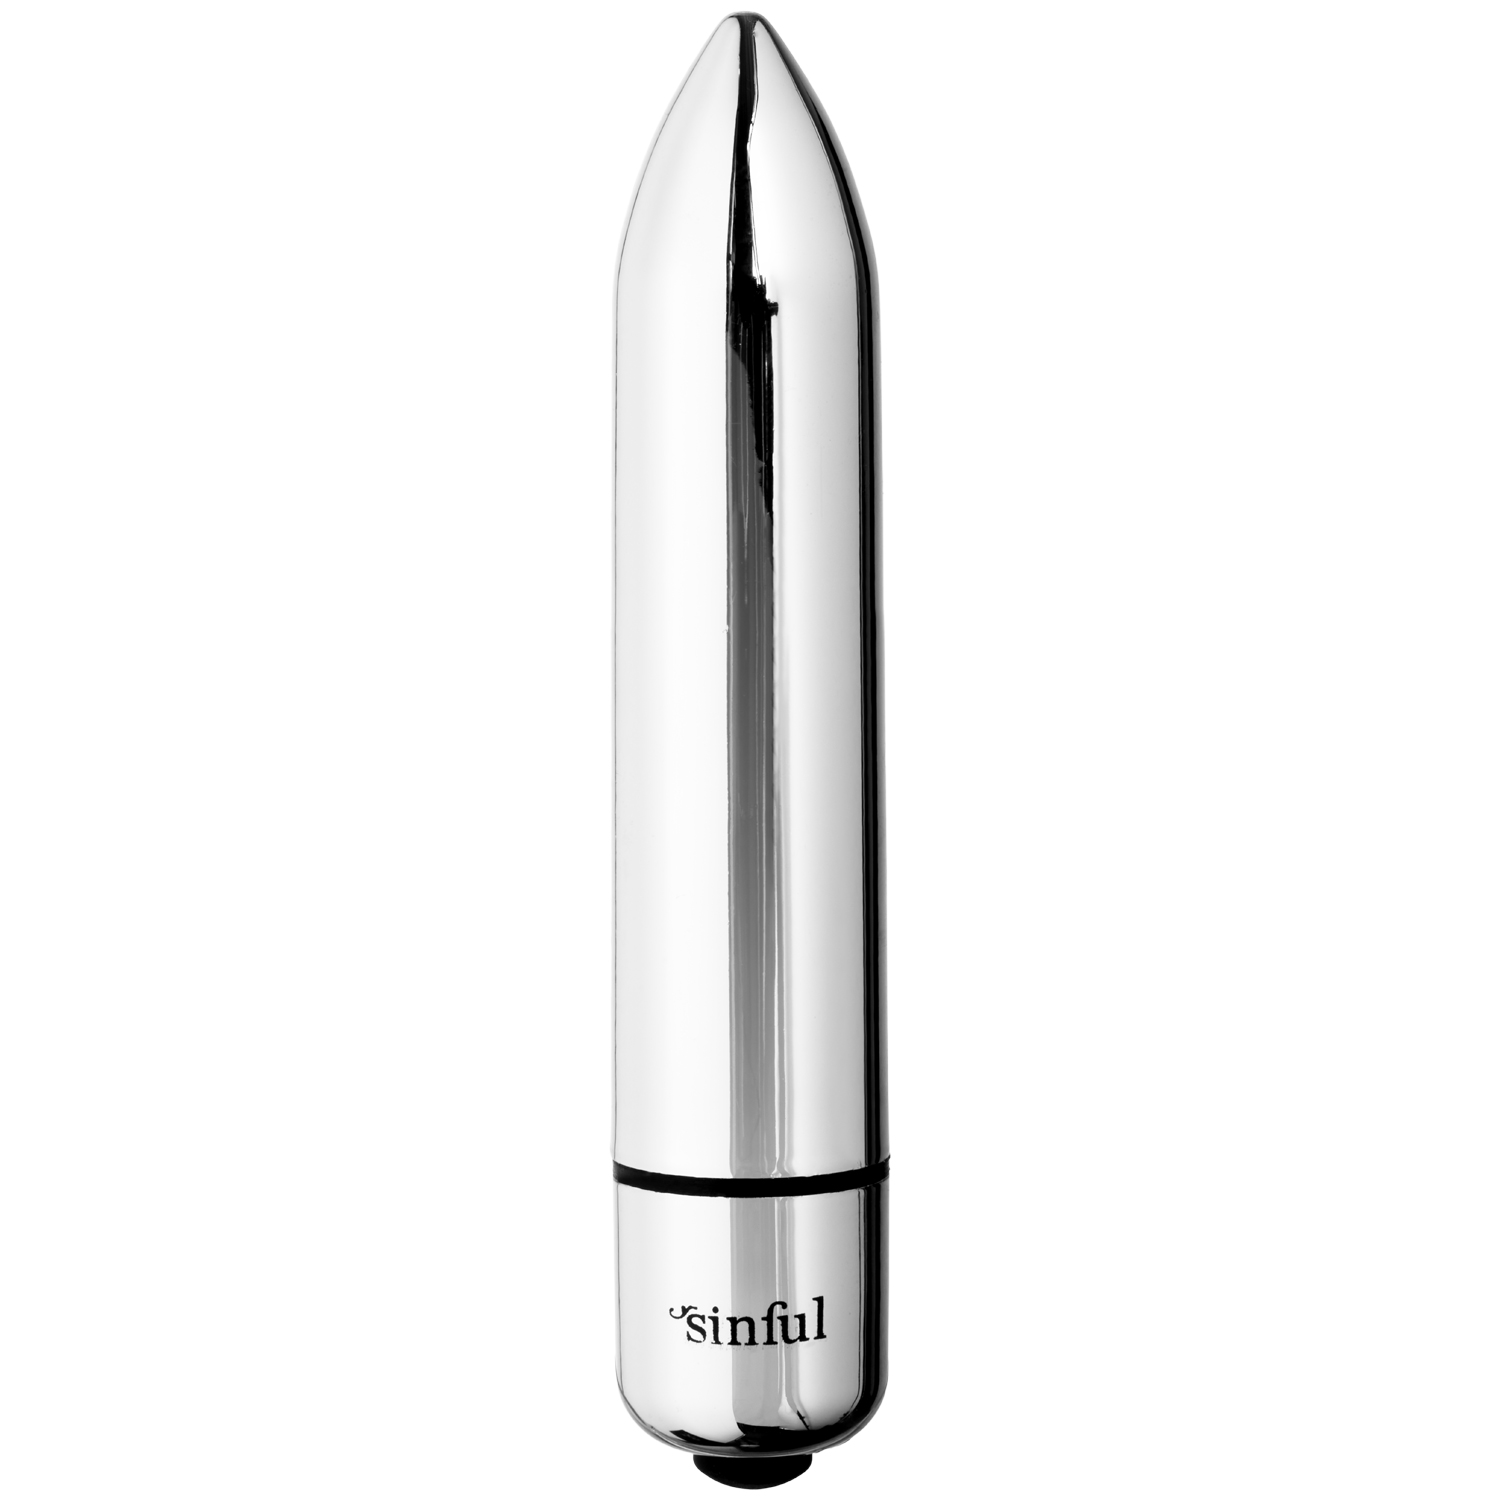 Sinful 10-Speed Magic Silver Bullet Vibrator   - Silver